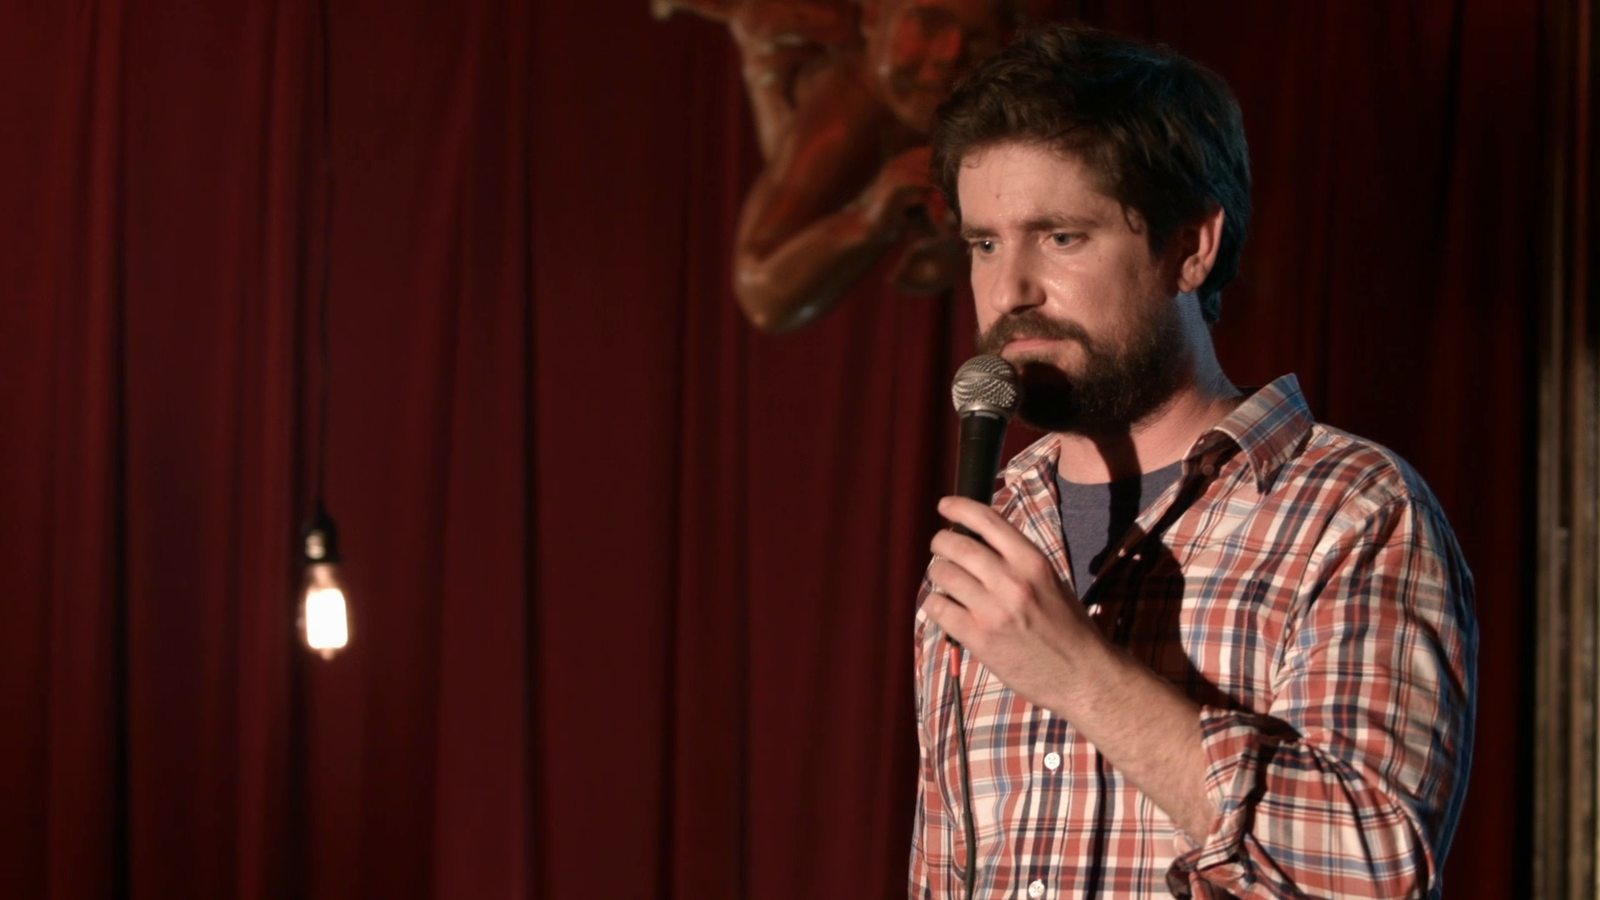 Brian Gaar continues to do stand-up in Austin - Axios Austin